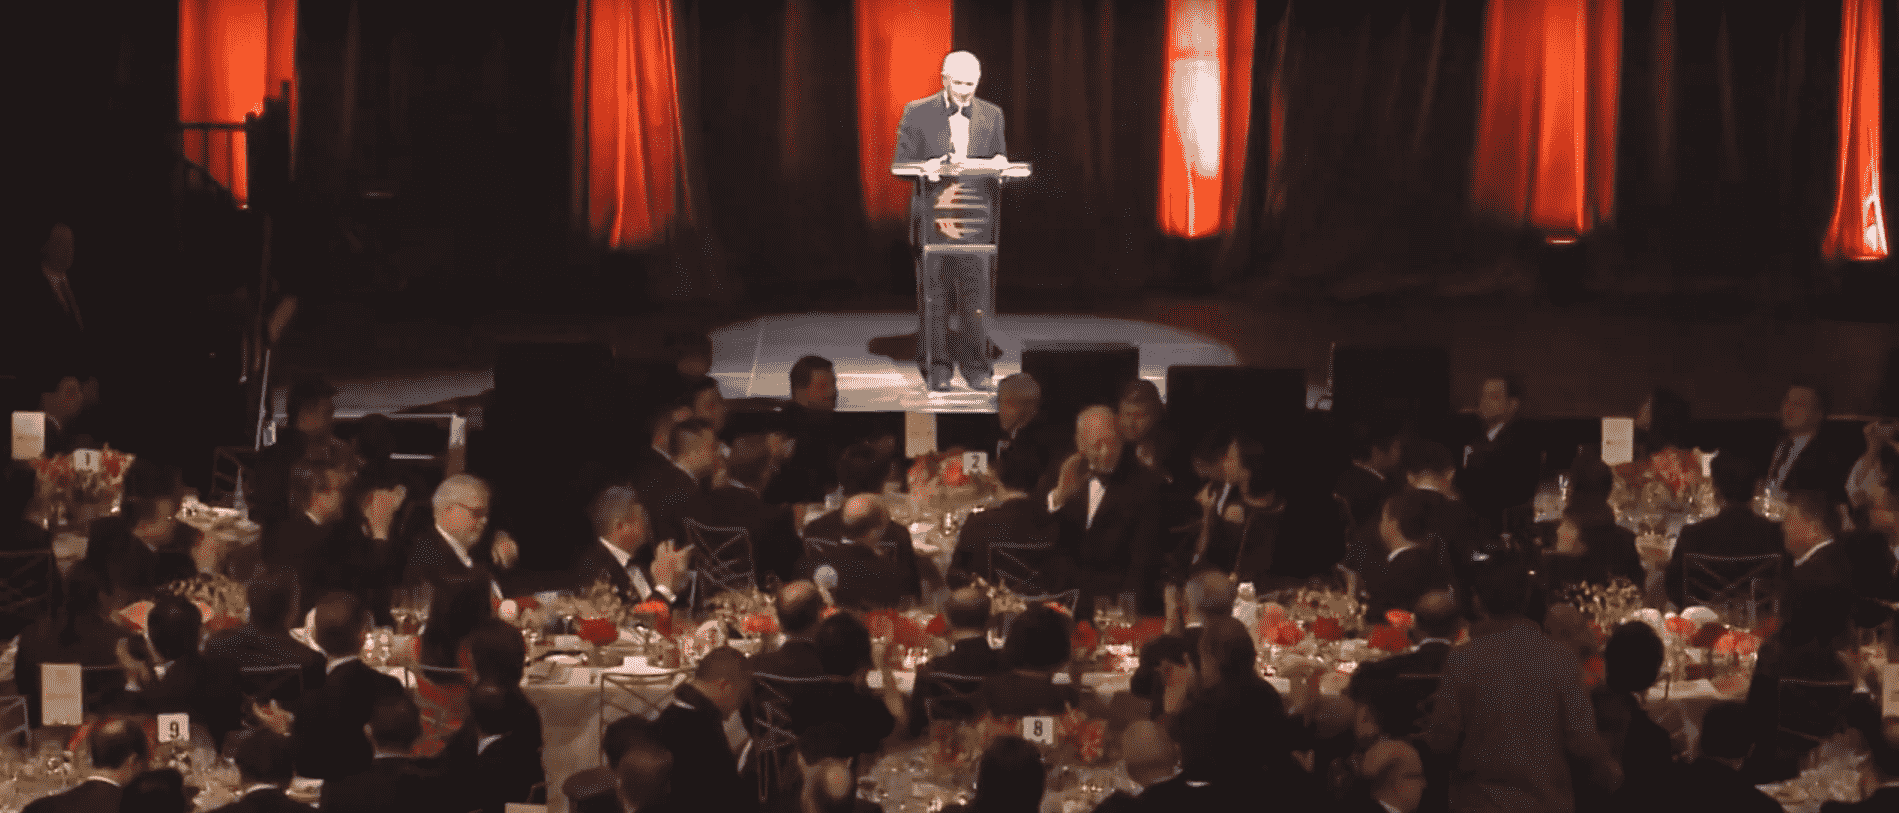 Stephen Schwarzman stands at the podium while Tung Chee-hwa waves to the audience around him during the 2018 China General Chamber of Commerce New Year gala. [YouTube/Screenshot/ChinaGeneralChamberOfCommerceUSA]